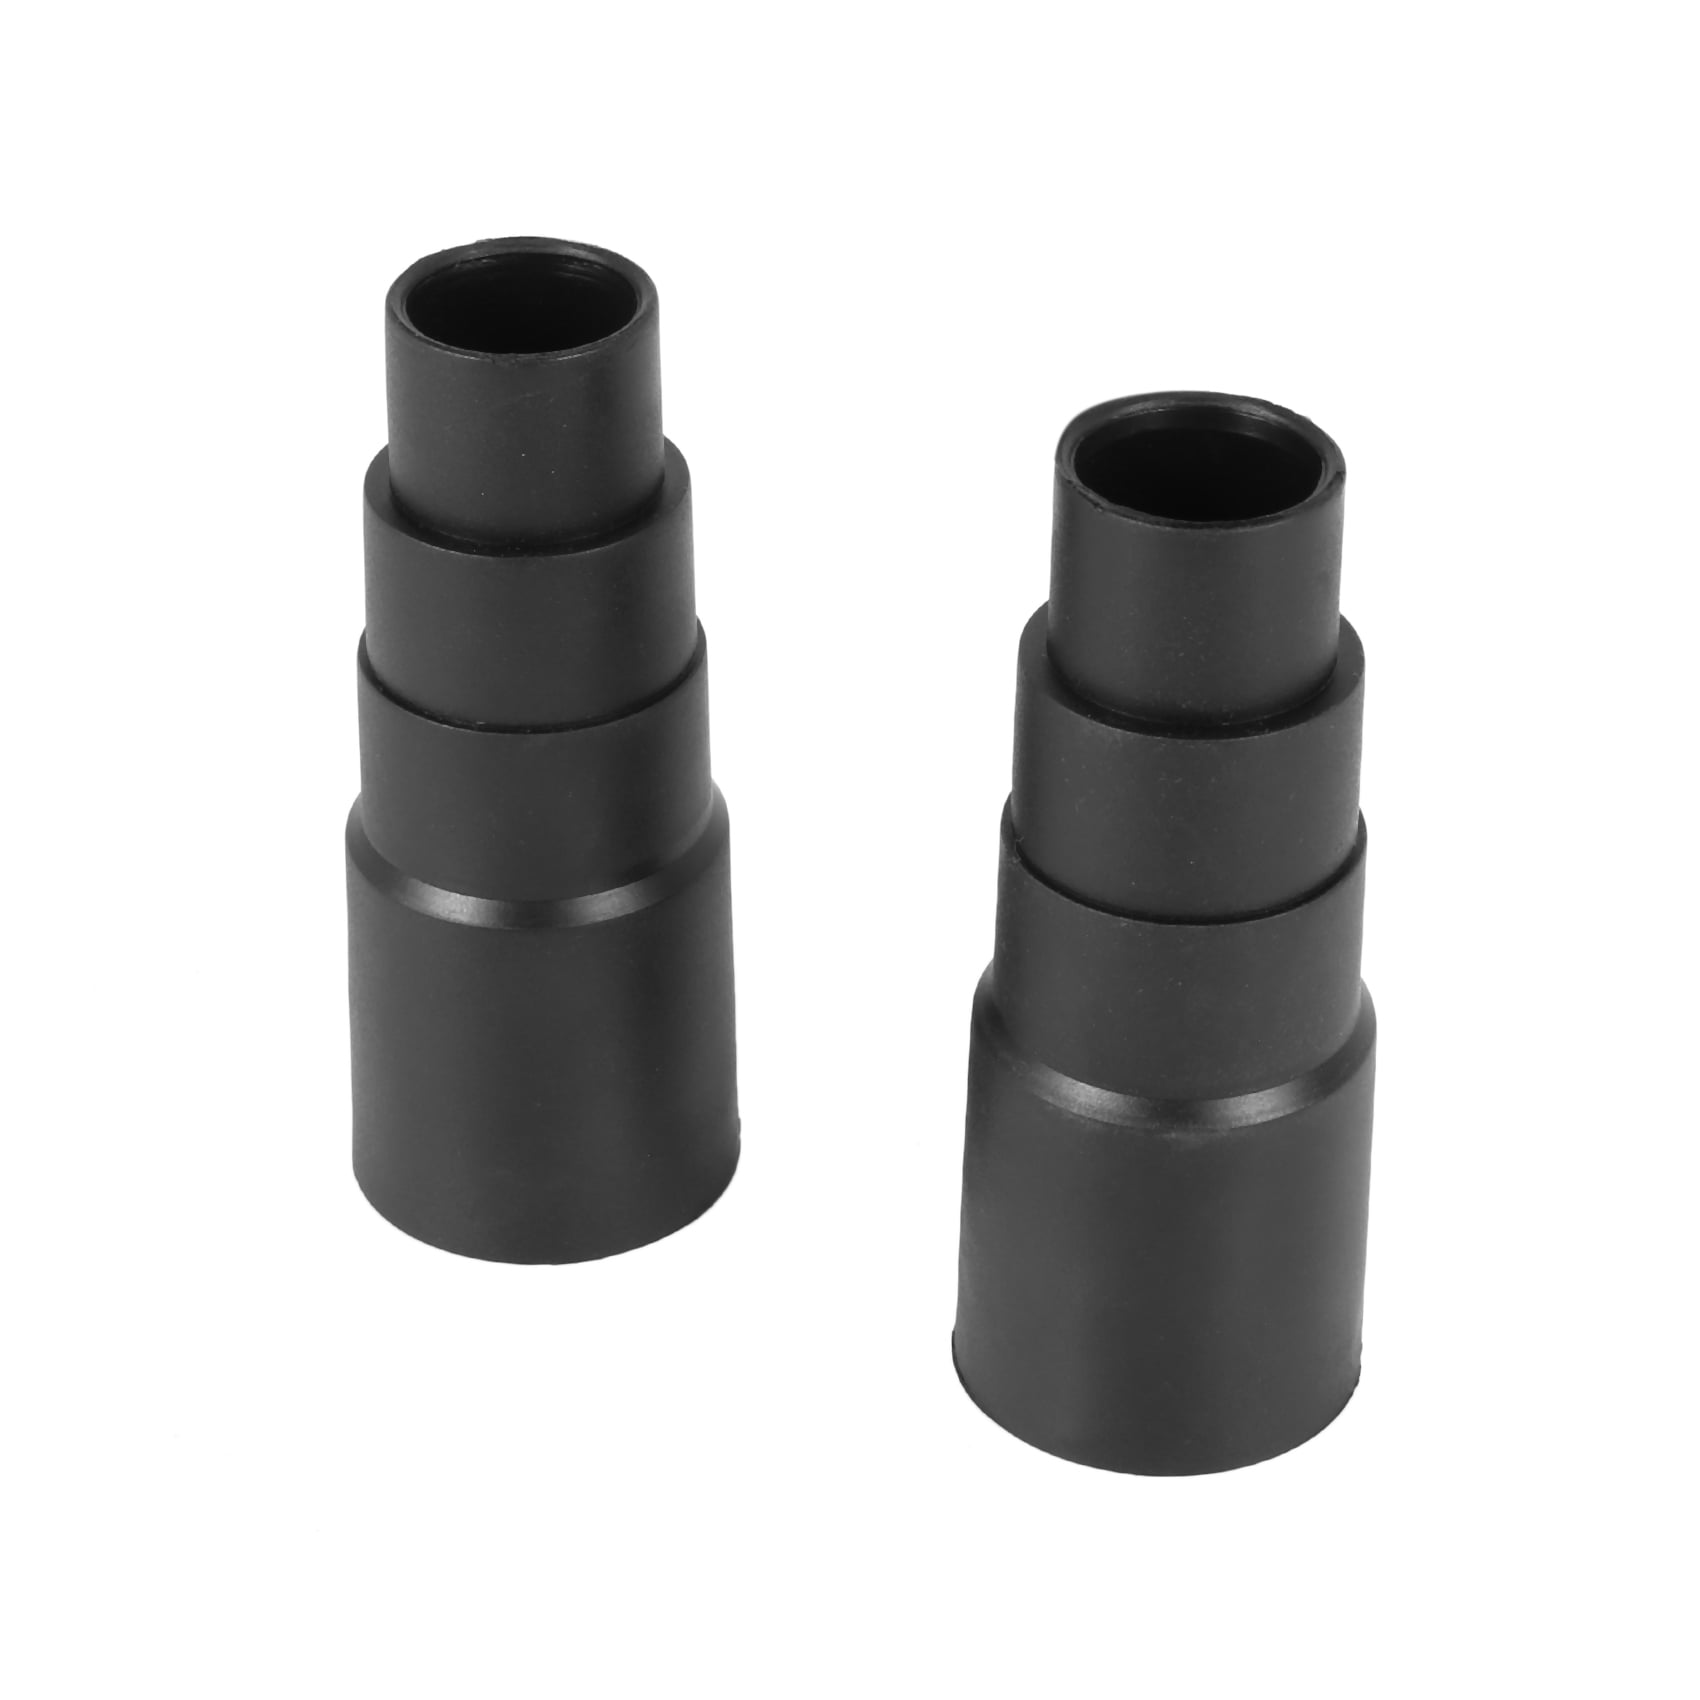 Details about   2Pcs Wet/Dry Vacuum Universal Tool Designed to Fit More Vacuums and AttachmenBW 